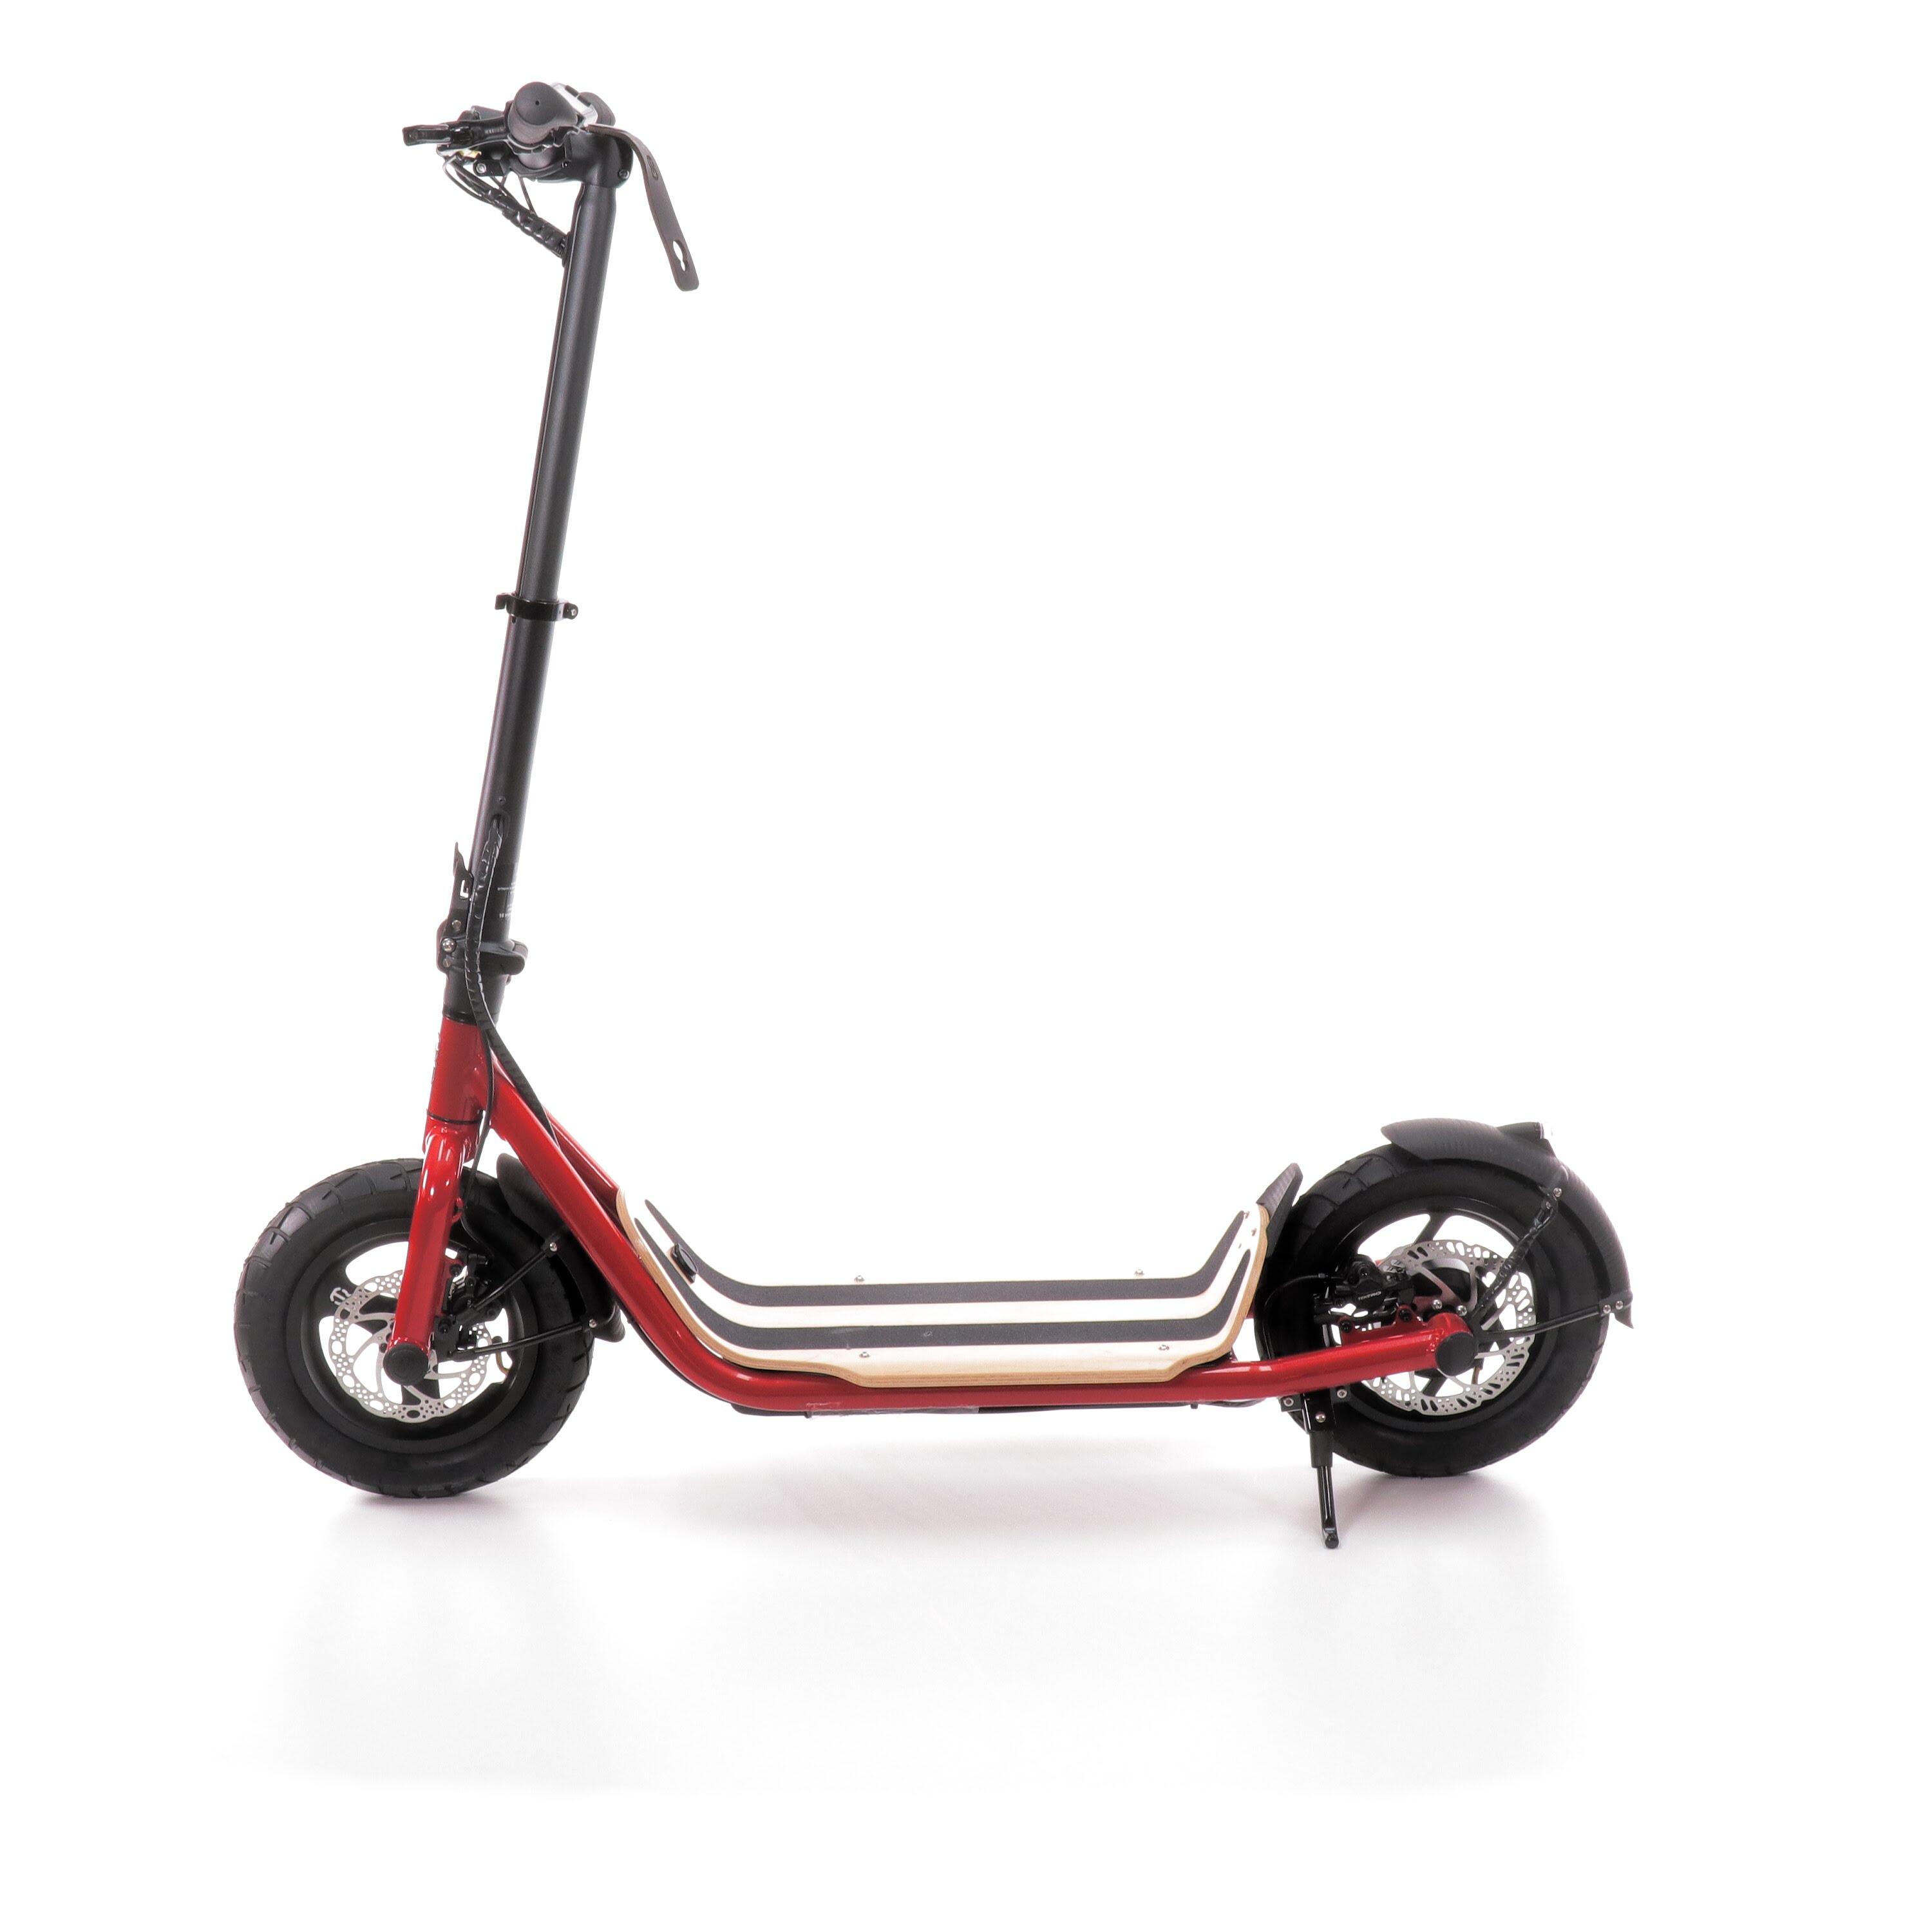 8Tev Adult Electric Scooter, B12 Proxi, Red 2/5